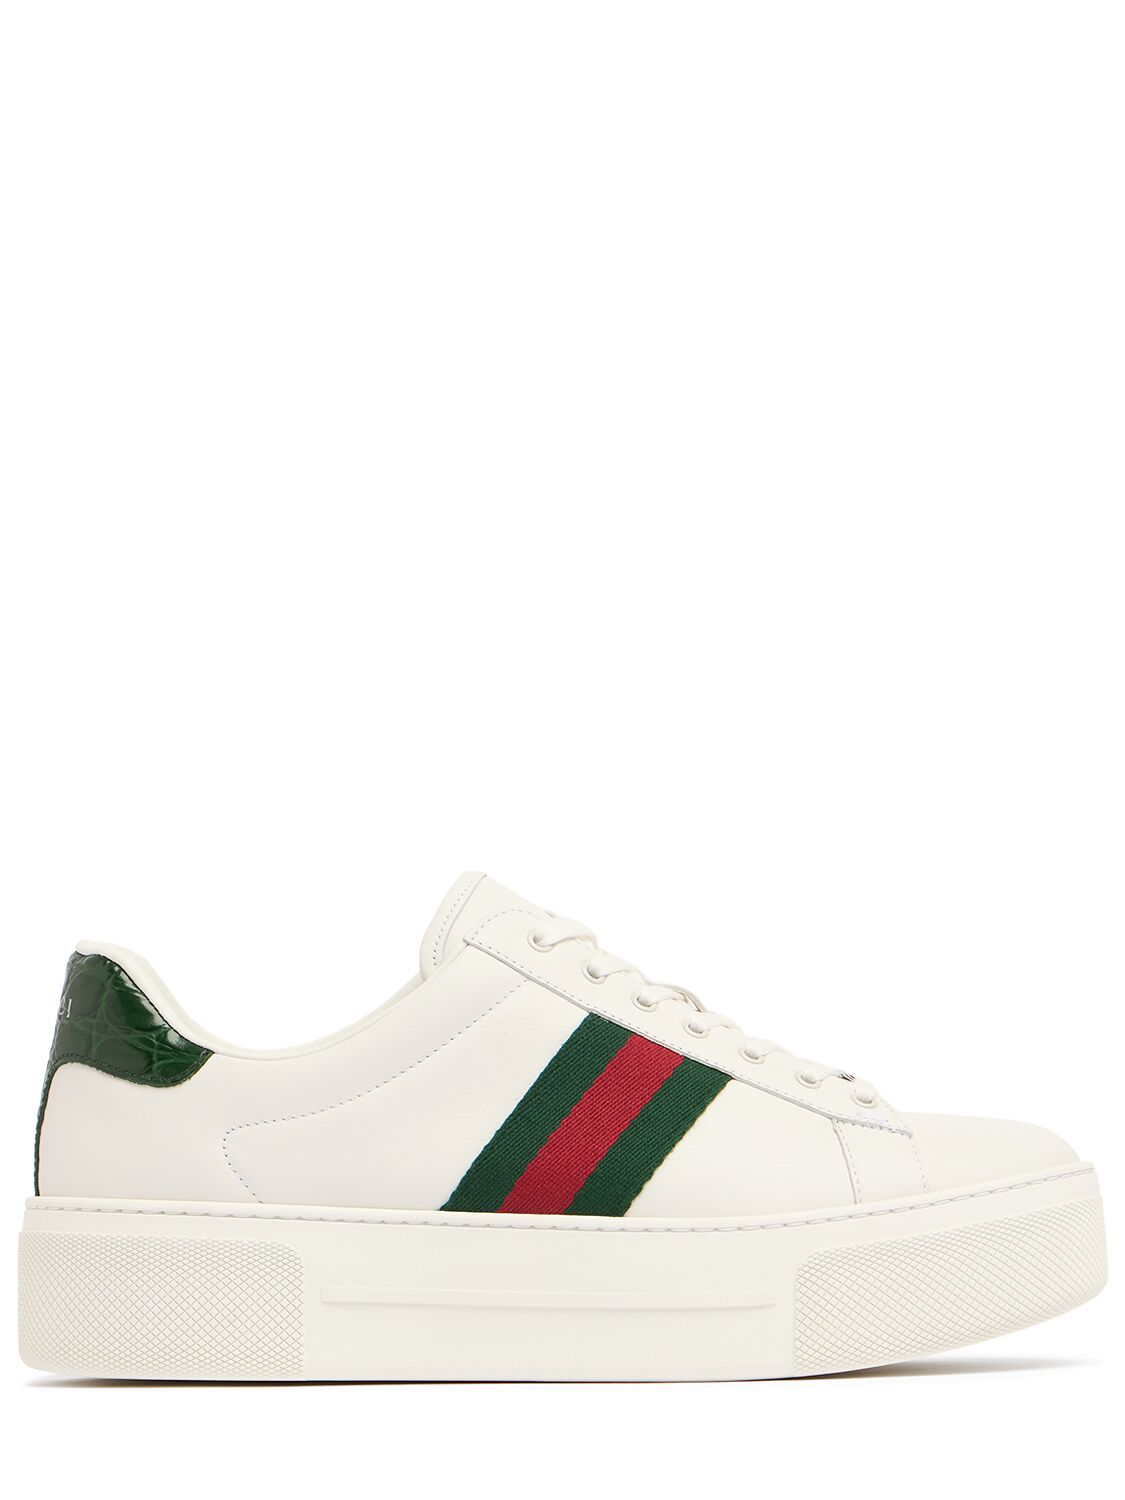 Gucci 30mm  Ace Leather Sneakers In Multi